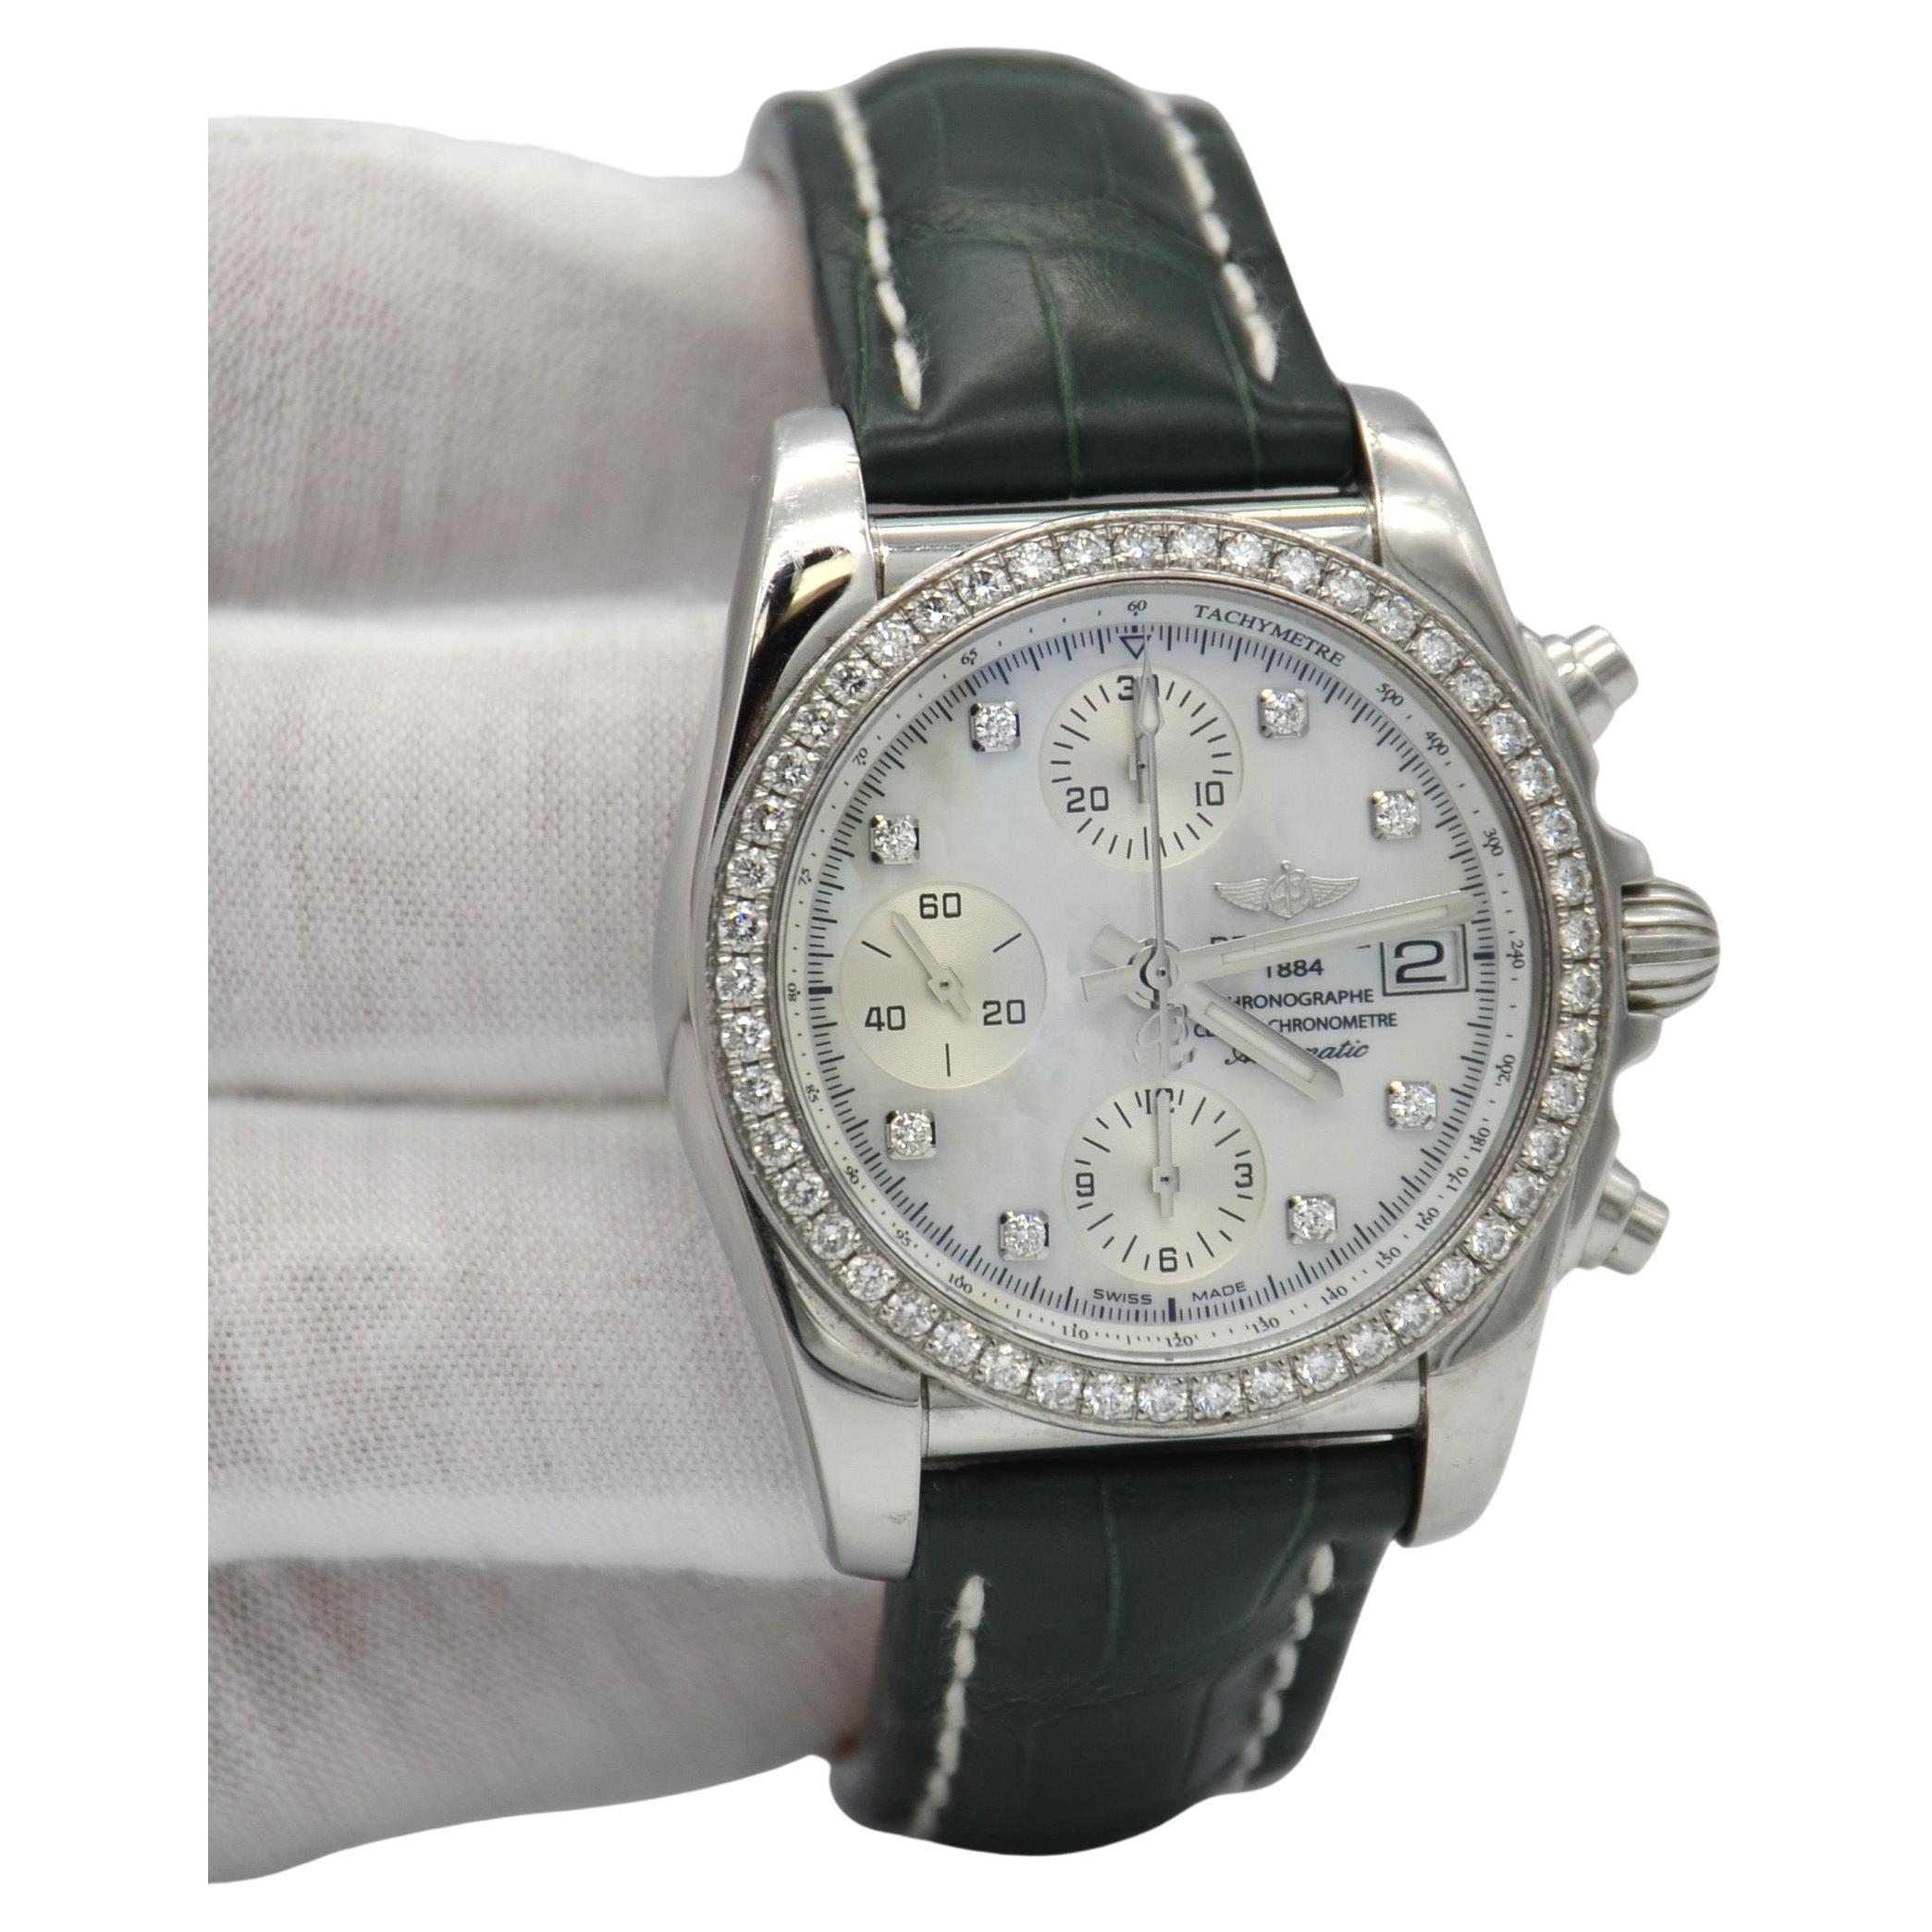 Breitling Chronomat, Reference Number: A13310